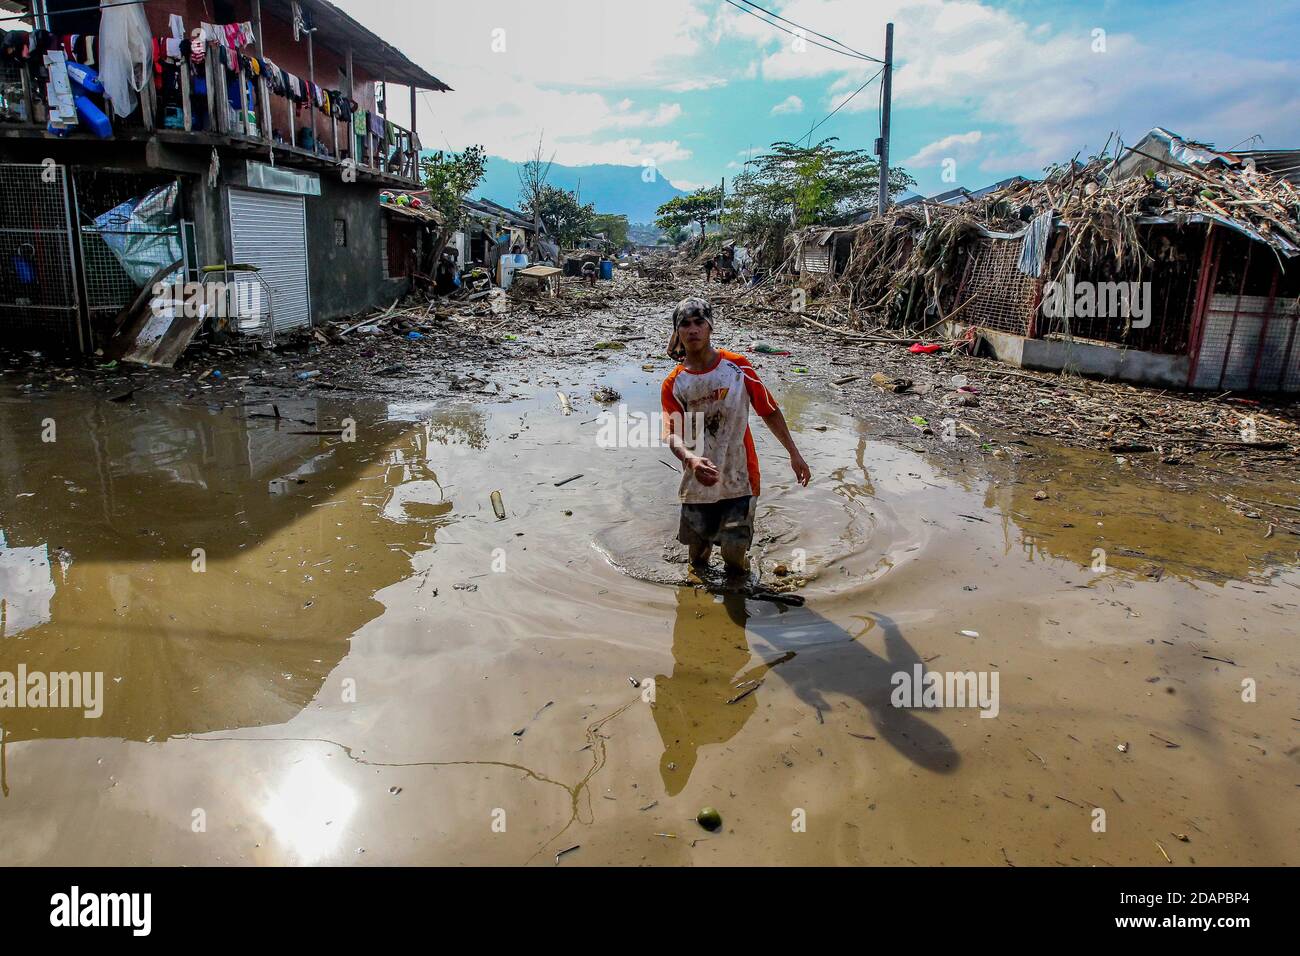 Rizal, Philippines. 14th Nov, 2020. A resident wades through knee-deep mud after the flood brought by Typhoon Vamco in Rizal Province, the Philippines, Nov. 14, 2020. Typhoon Vamco barrelled through the Philippines' main island of Luzon from Wednesday to Thursday, triggering flash floods and landslides in many regions and leaving at least 53 dead. Credit: Rouelle Umali/Xinhua/Alamy Live News Stock Photo